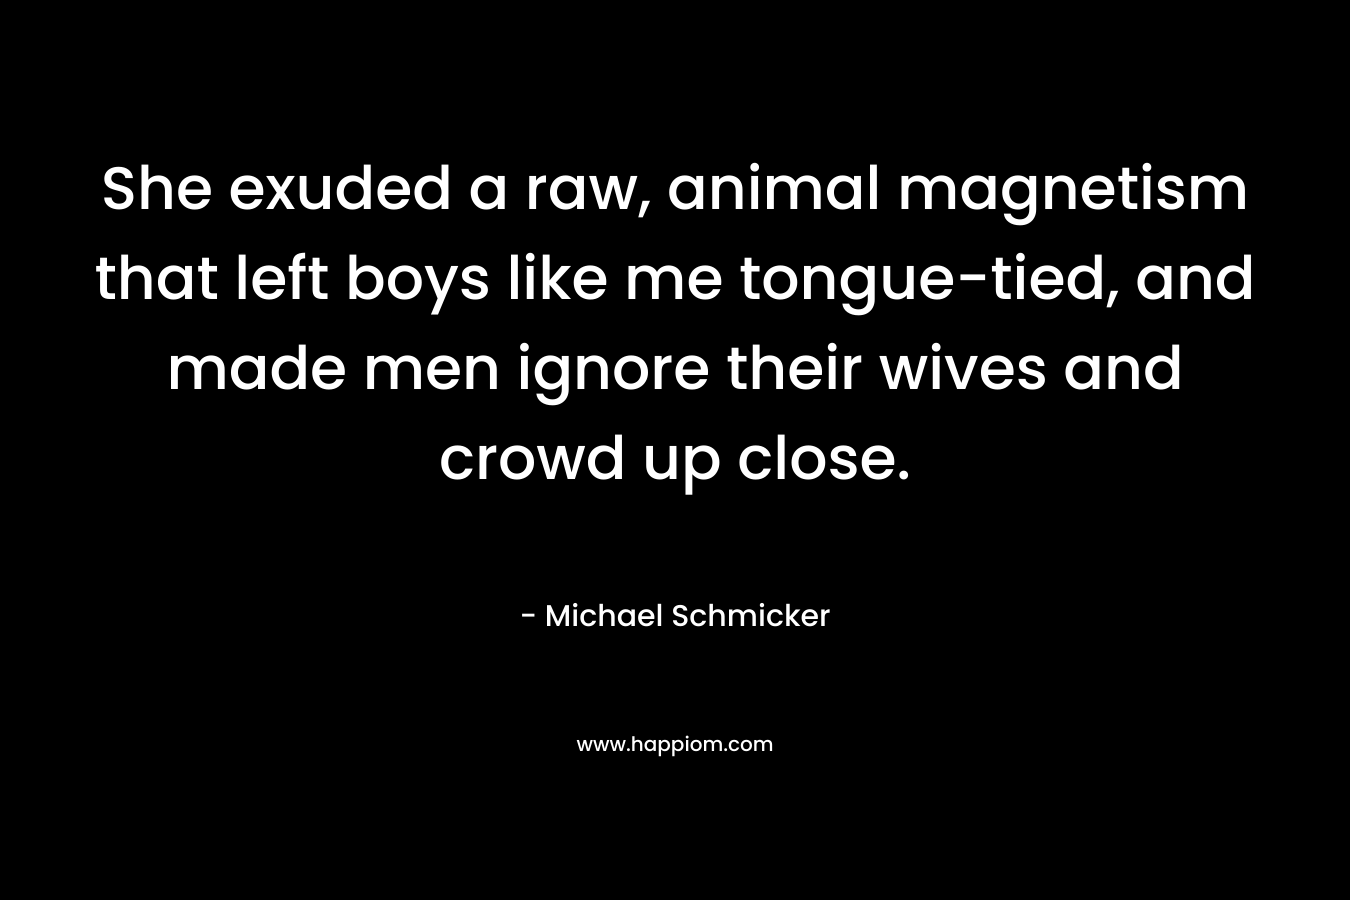 She exuded a raw, animal magnetism that left boys like me tongue-tied, and made men ignore their wives and crowd up close. – Michael Schmicker